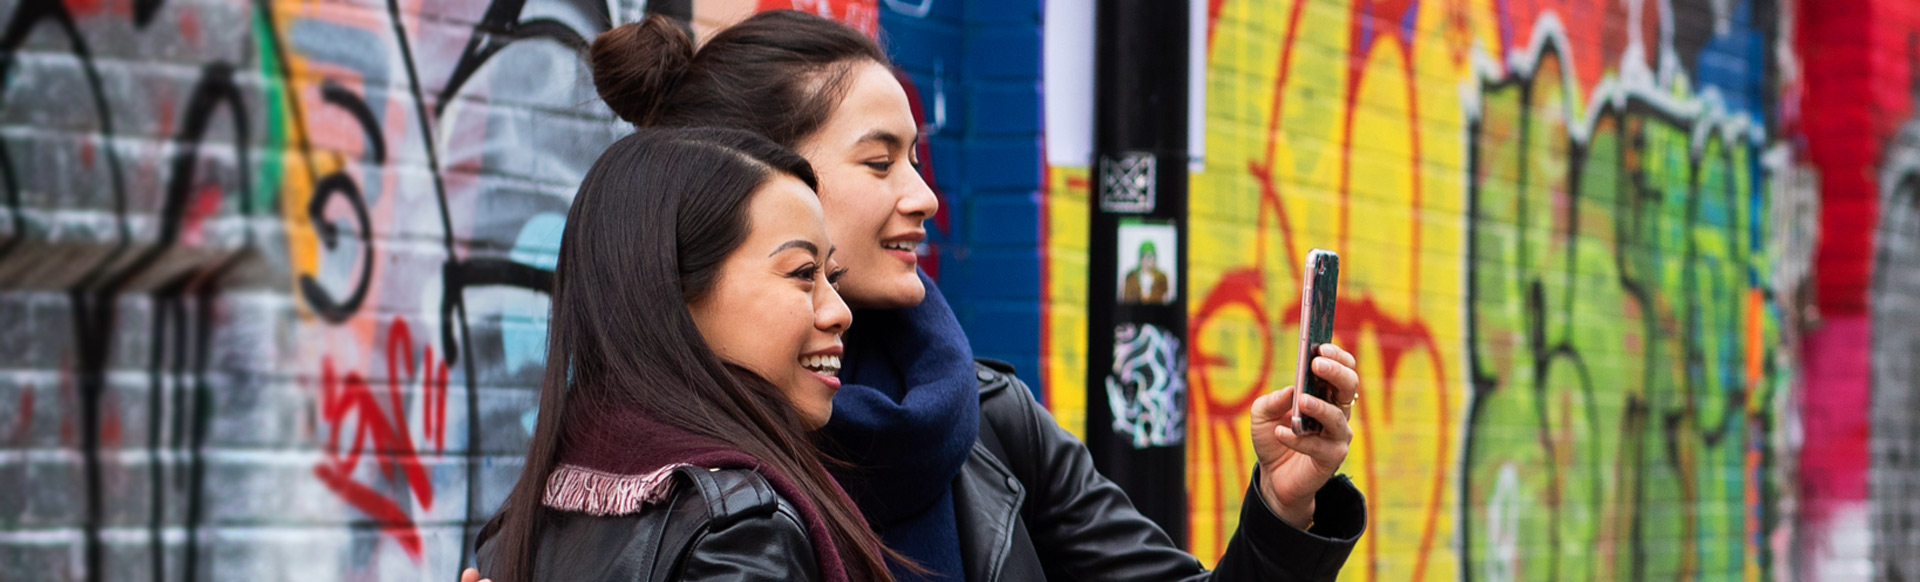 Two women take a selfie in front of a wall covered in colourful street art.